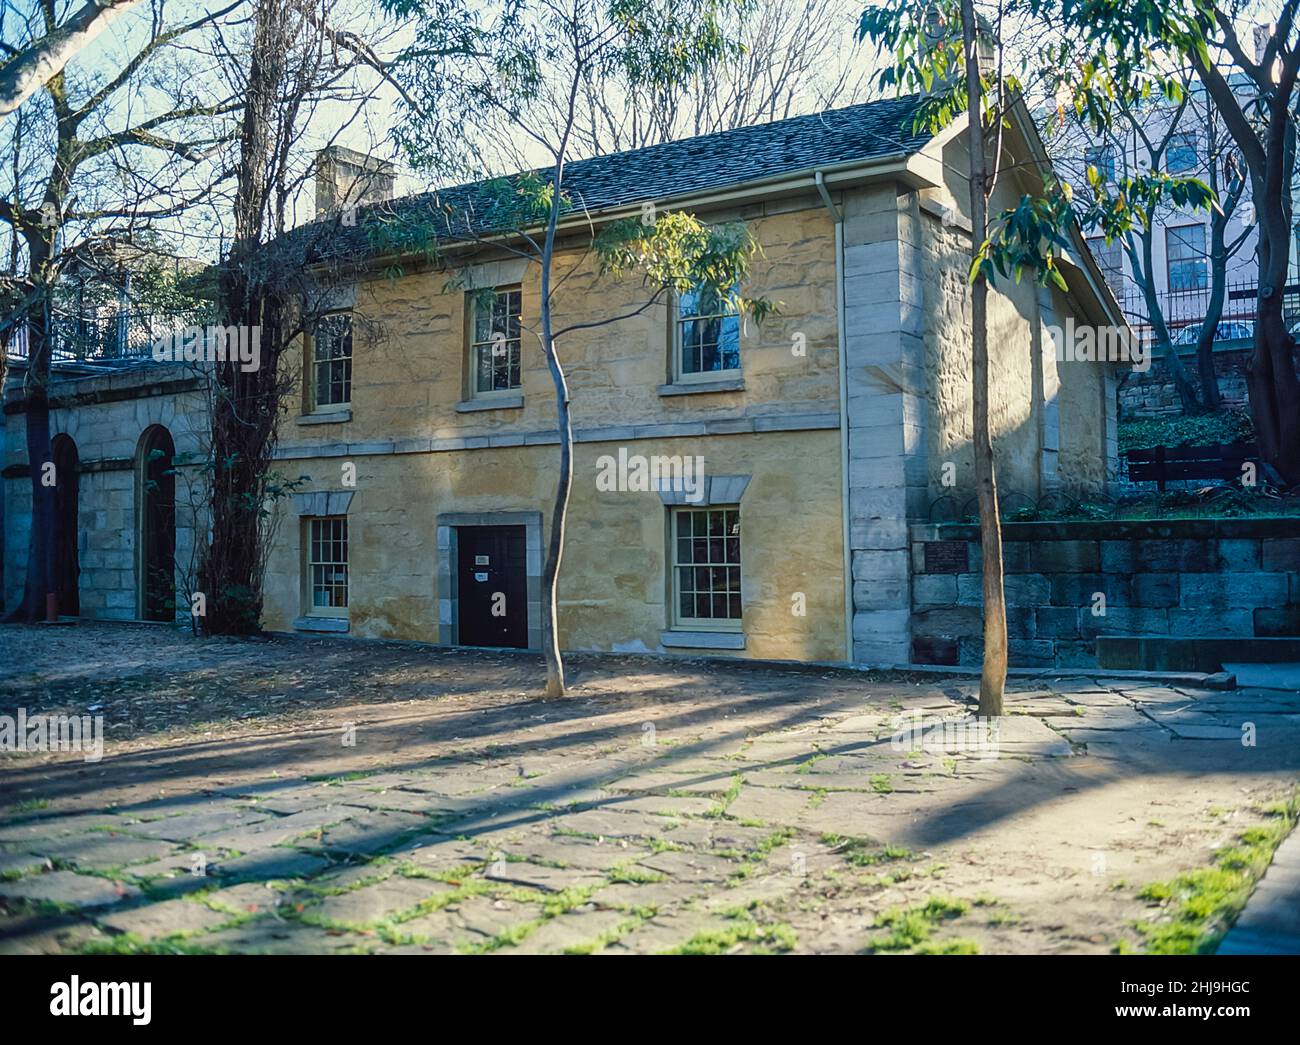 The image is of Captain Cadman's cottage-house, located at the Rocks Historical District of Sydney being an early example of Official Colonial Buildings and noted as the oldest house in Sydney dating back to 1816. The house originally being used as a waterfront police station to control government boats, their operations and crews being the residence of Government Coxswain. John Cadman was the longest serving Coxswain. originally transported to NSW as a convict, he was pardoned in 1814. He was appointed Coxswain in 1827 and served until 1845 being resident with his family at the Cottage Stock Photo